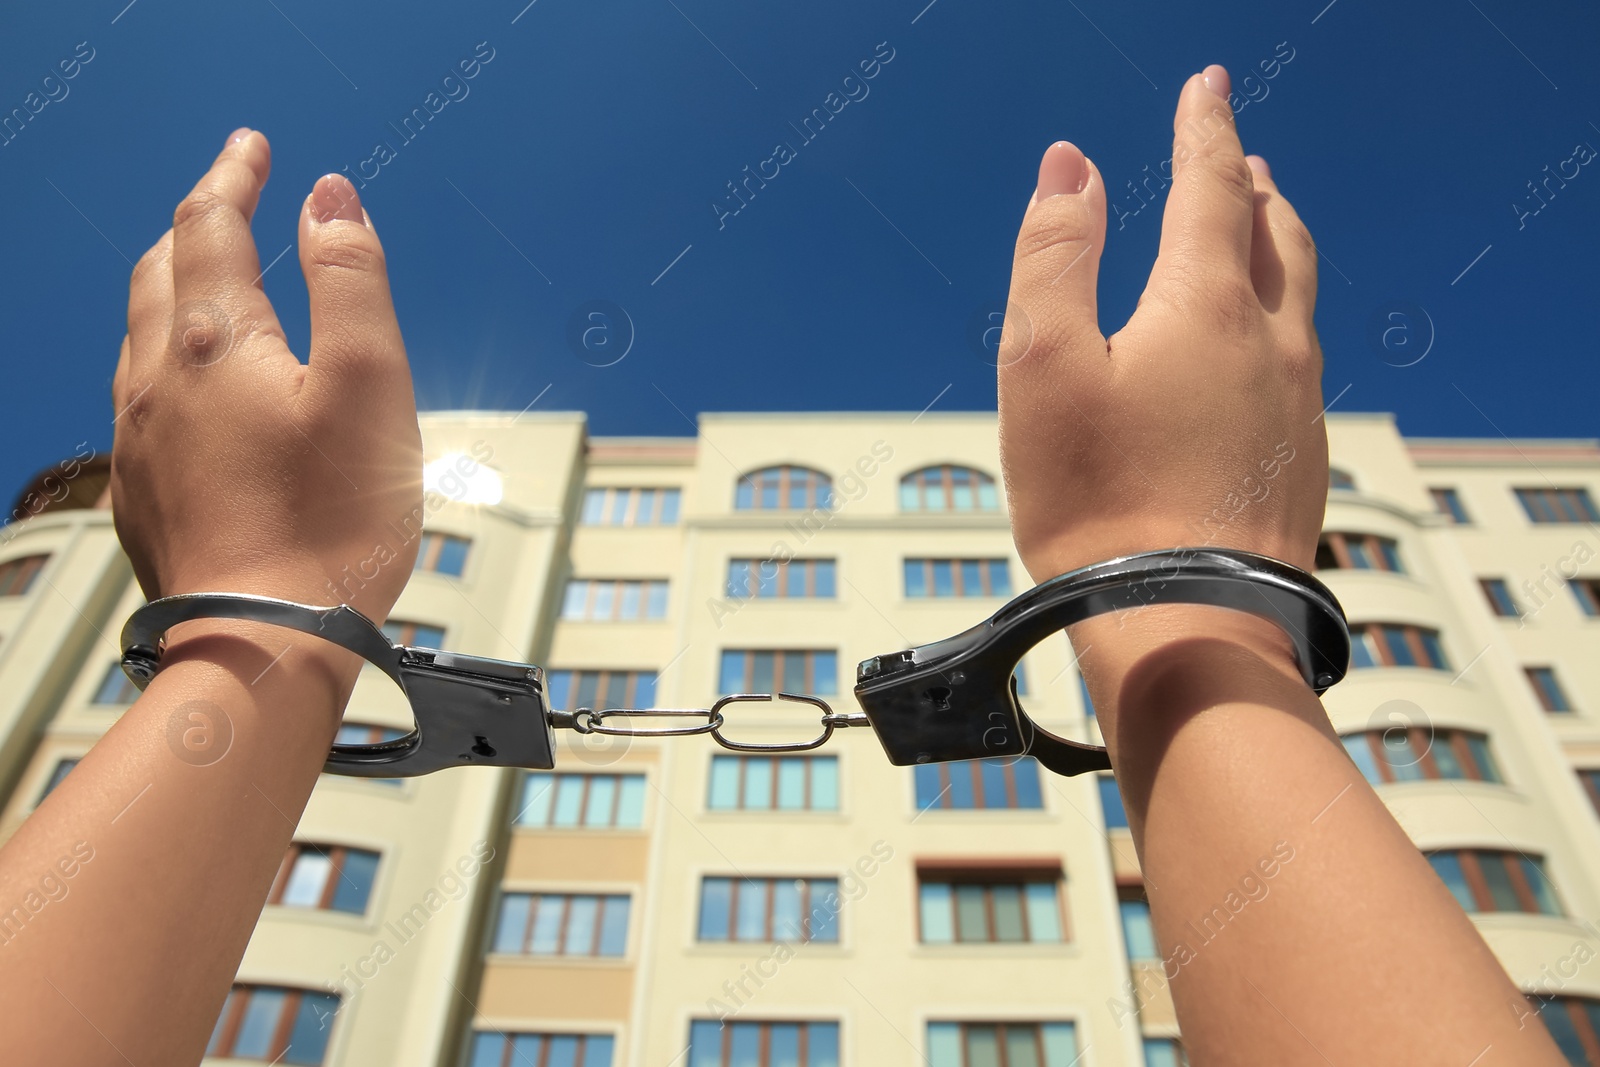 Photo of Woman in handcuffs against building under blue sky, closeup